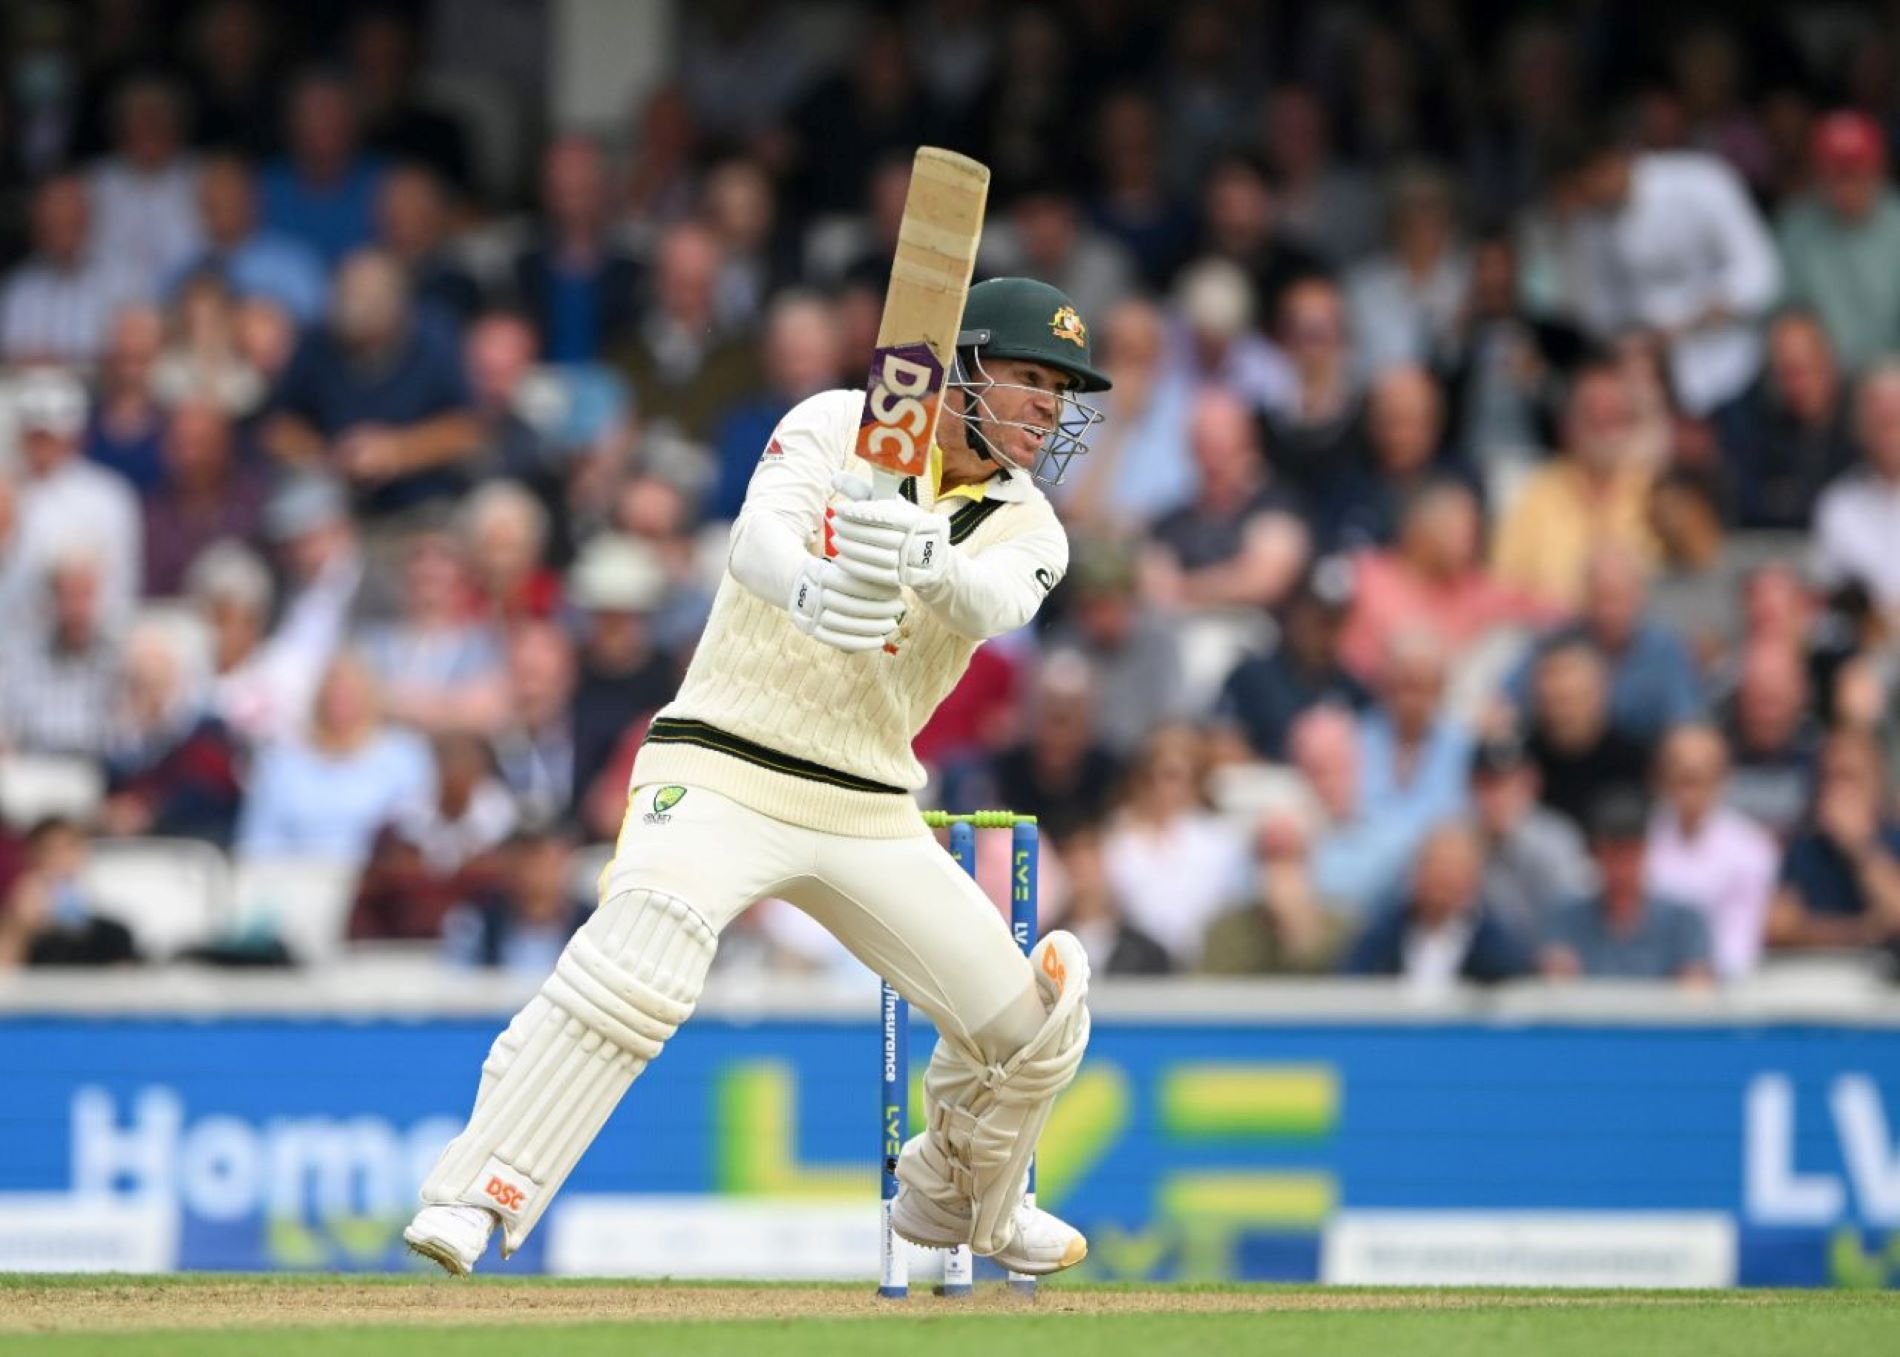 Warner has struggled to be his attacking self in the Ashes series.